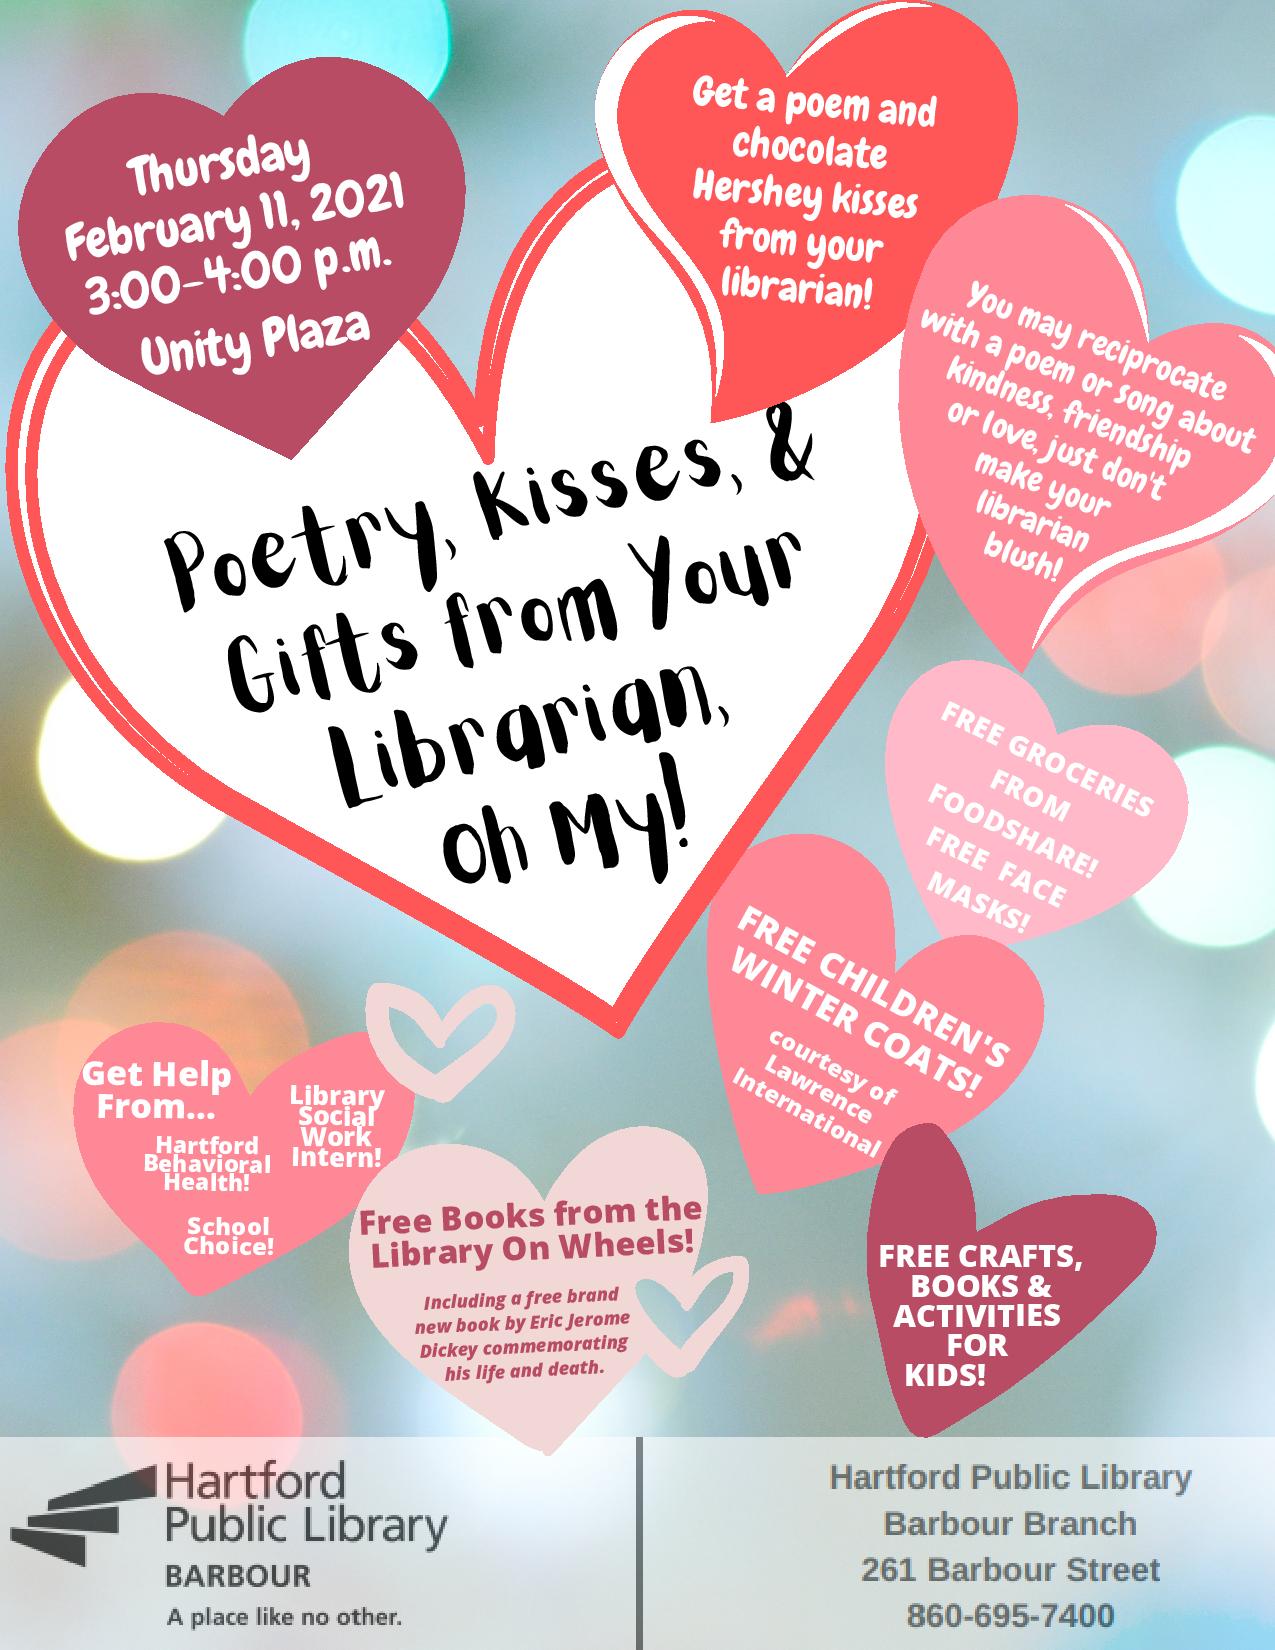 Poetry,Kisses & Gifts from Your Librarian